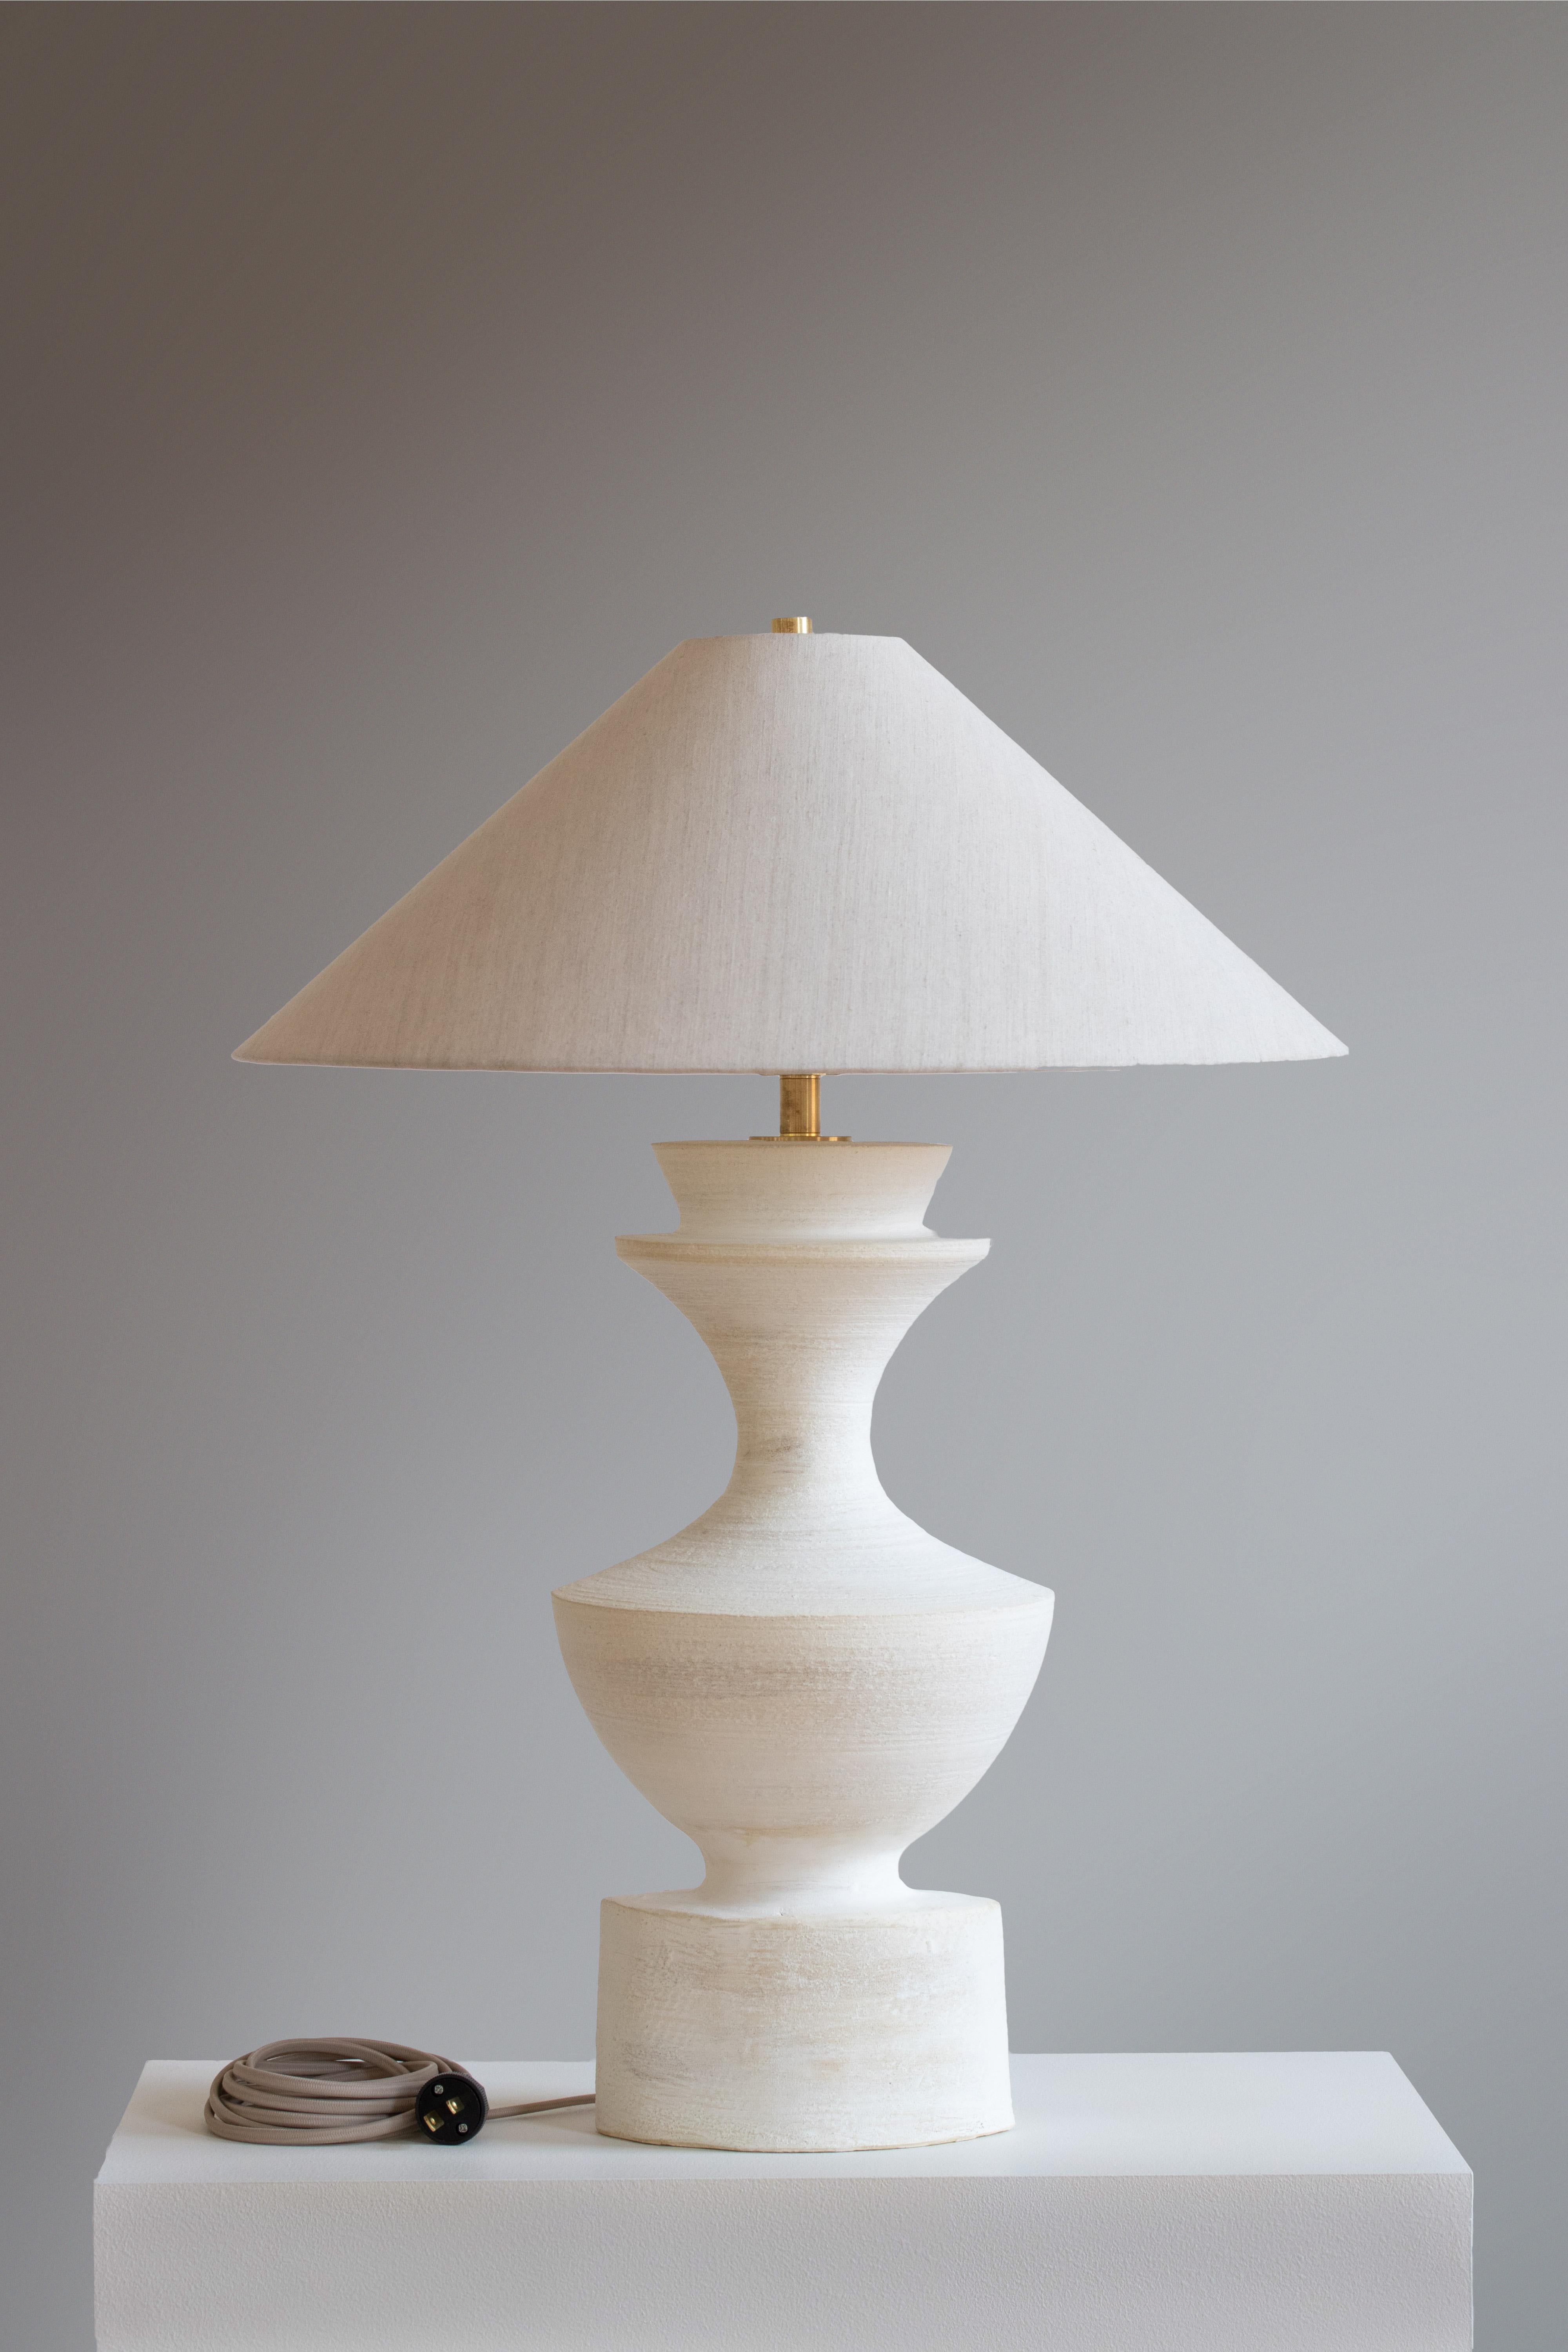 Terrasig Sophia Table Lamp by Danny Kaplan Studio
Dimensions: ⌀ 51 x H 69 cm
Materials: Glazed Ceramic, Unfinished Brass, Linen

This item is handmade, and may exhibit variability within the same piece. We do our best to maintain a consistent